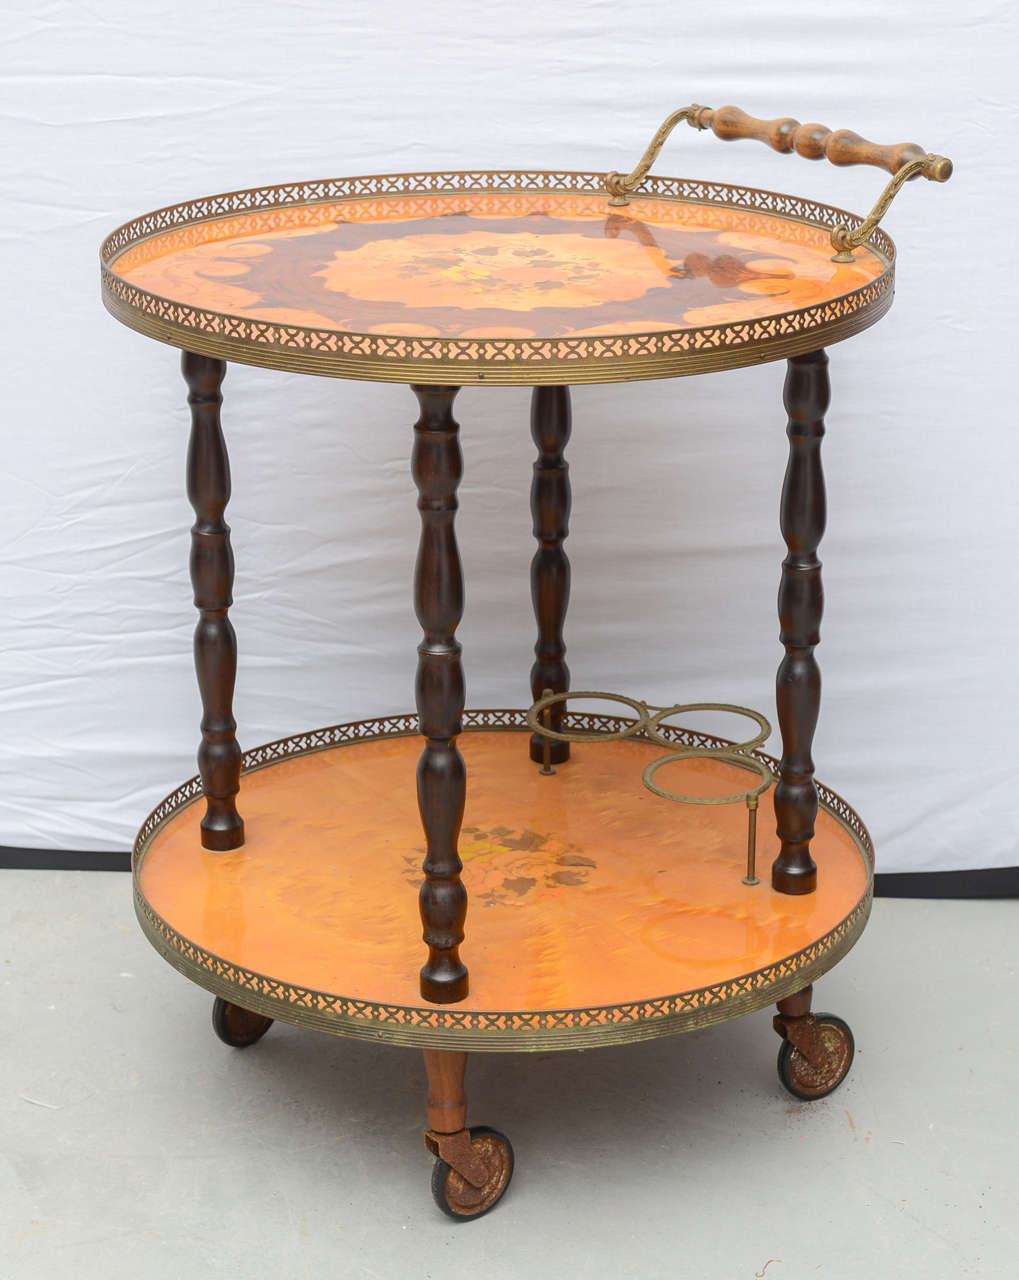 Inlaid wood and brass bar cart or tea trolley by Sorrento. Made in Italy, 1960.